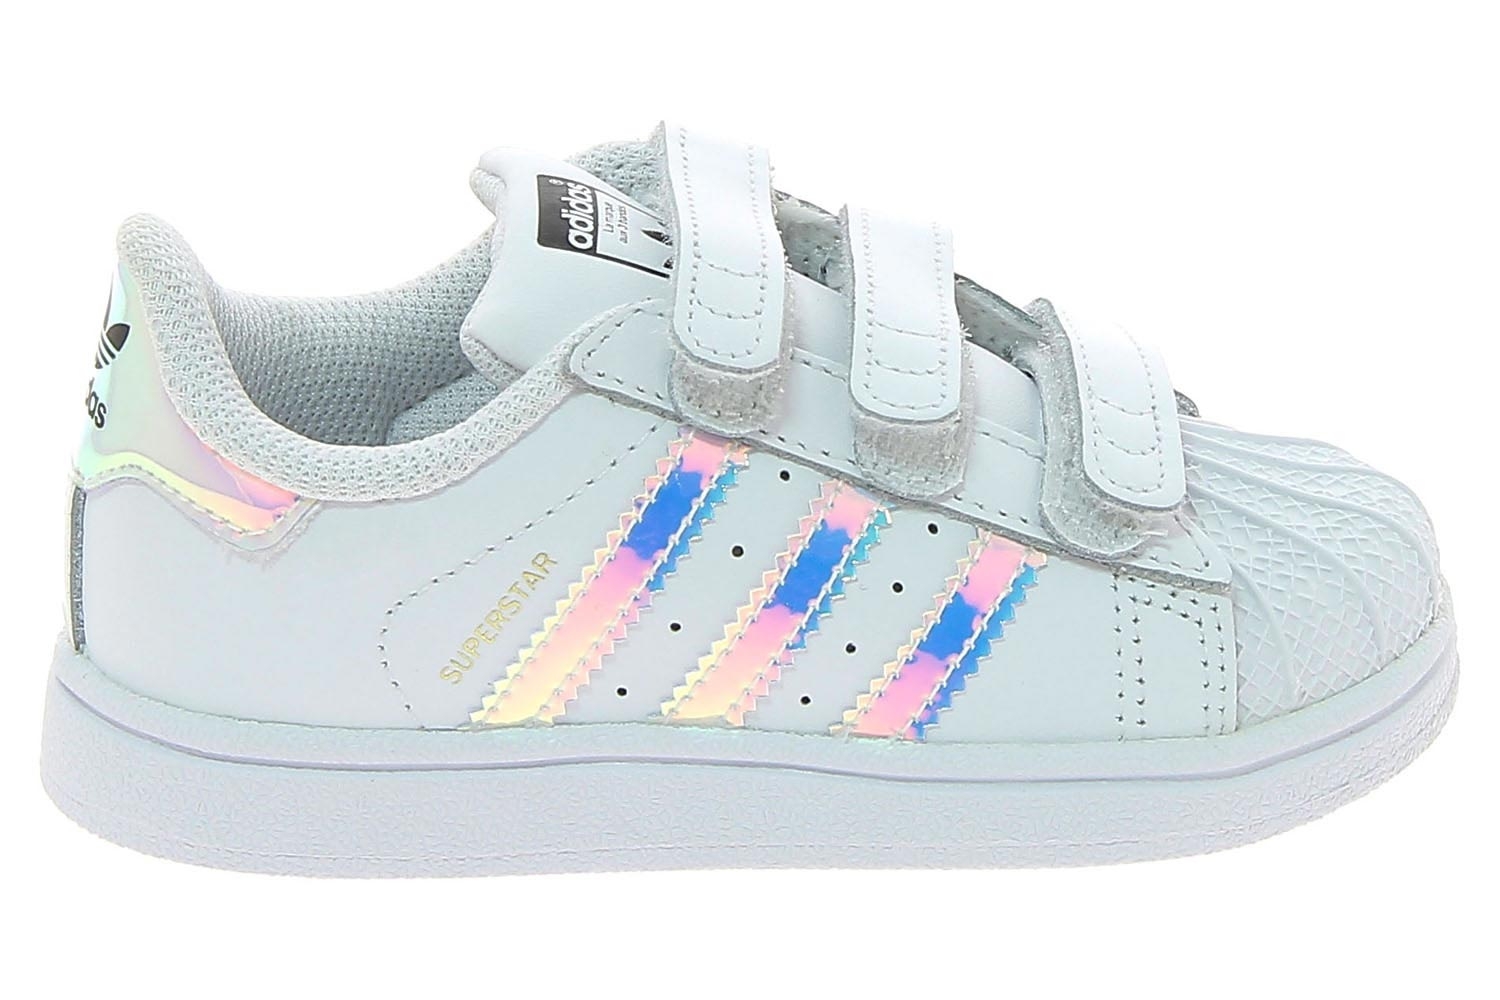 chaussures fille 25 adidas